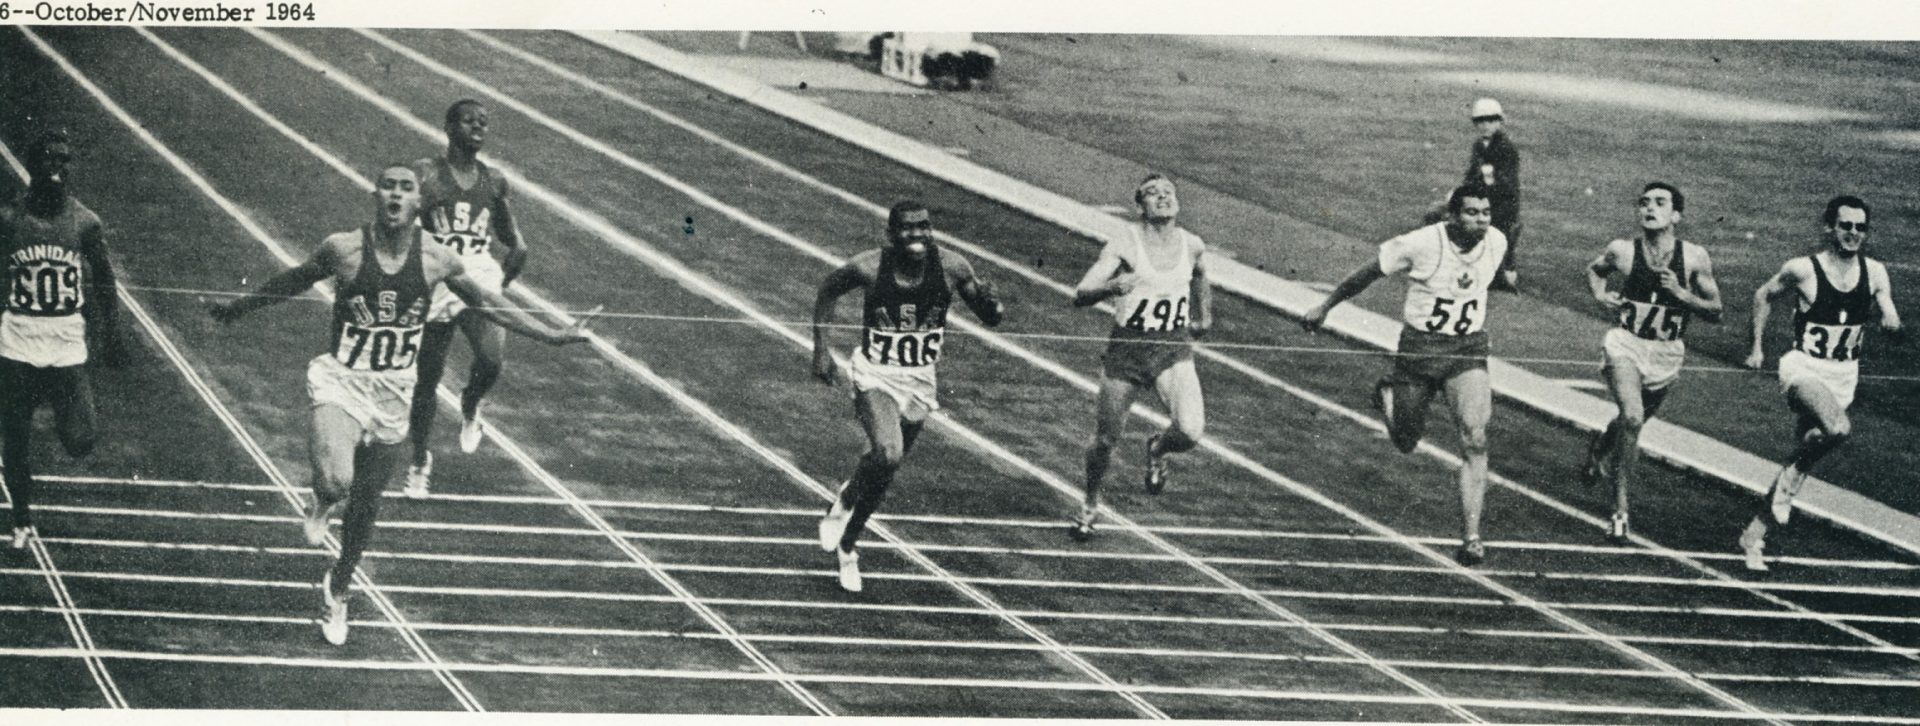 Henry Carr winning one of his two Olympic gold medals in 1964